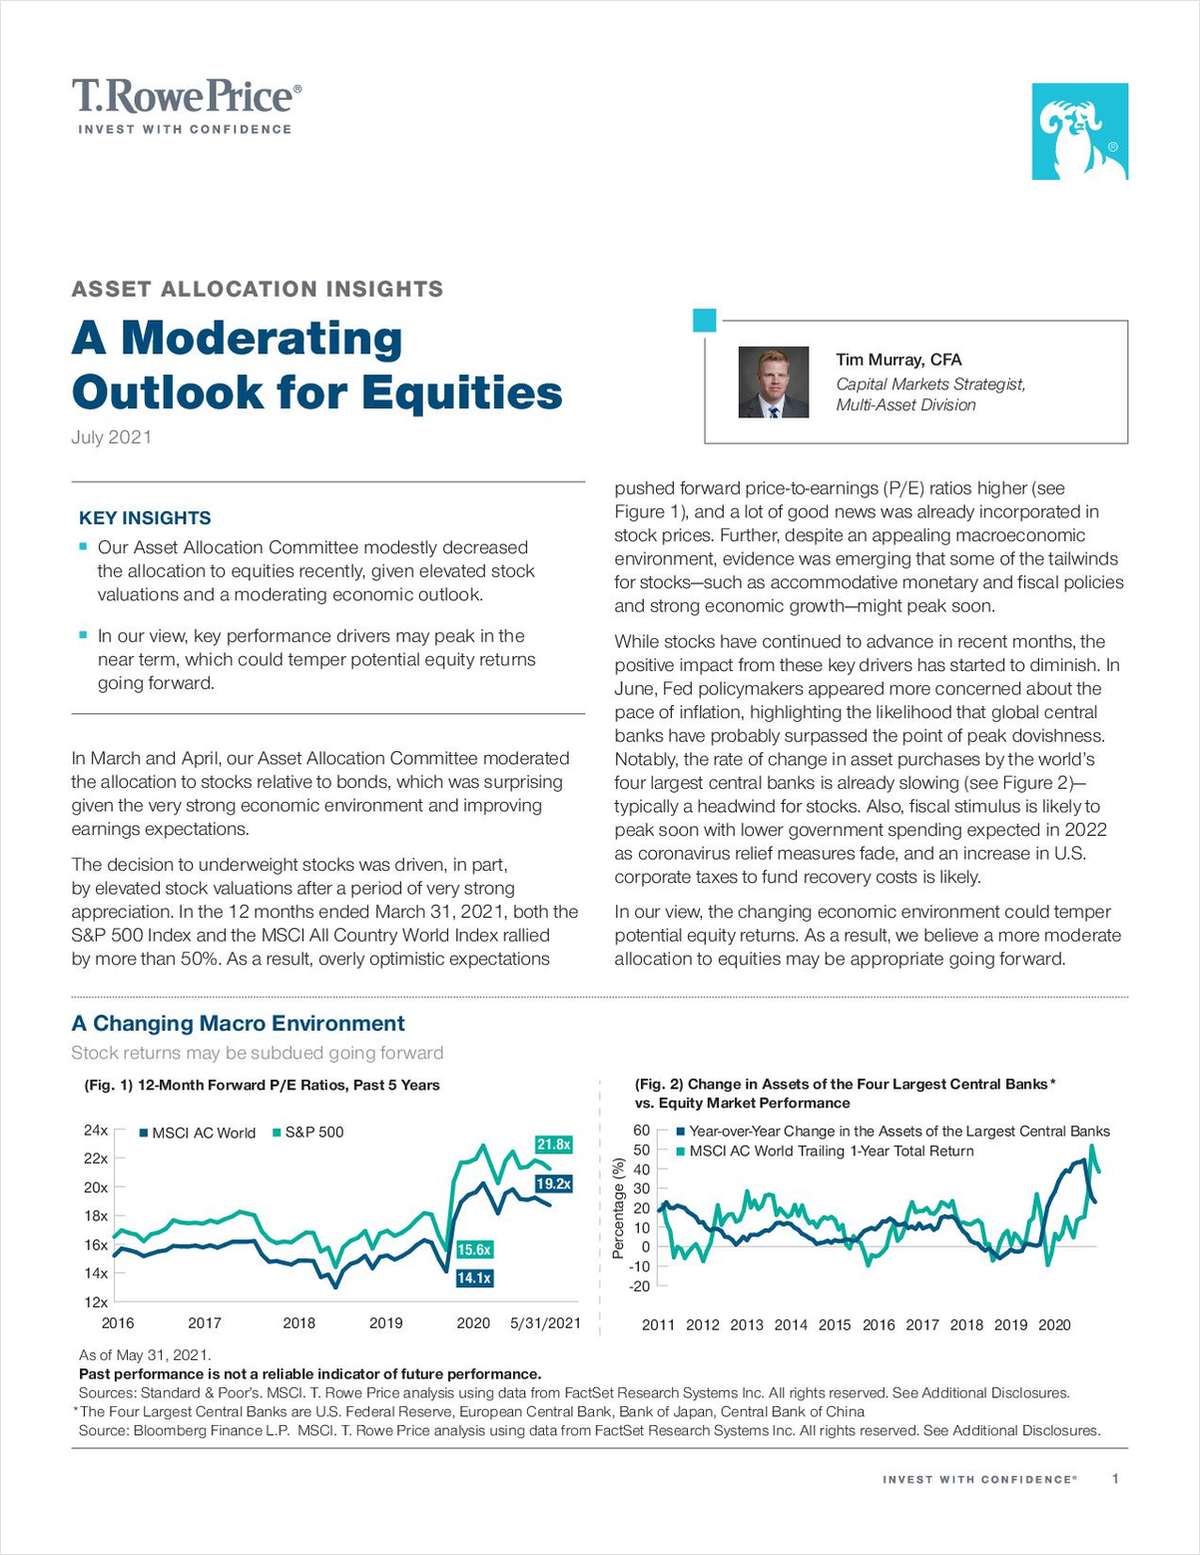 Asset Allocation Insights: A Moderating Outlook for Equities